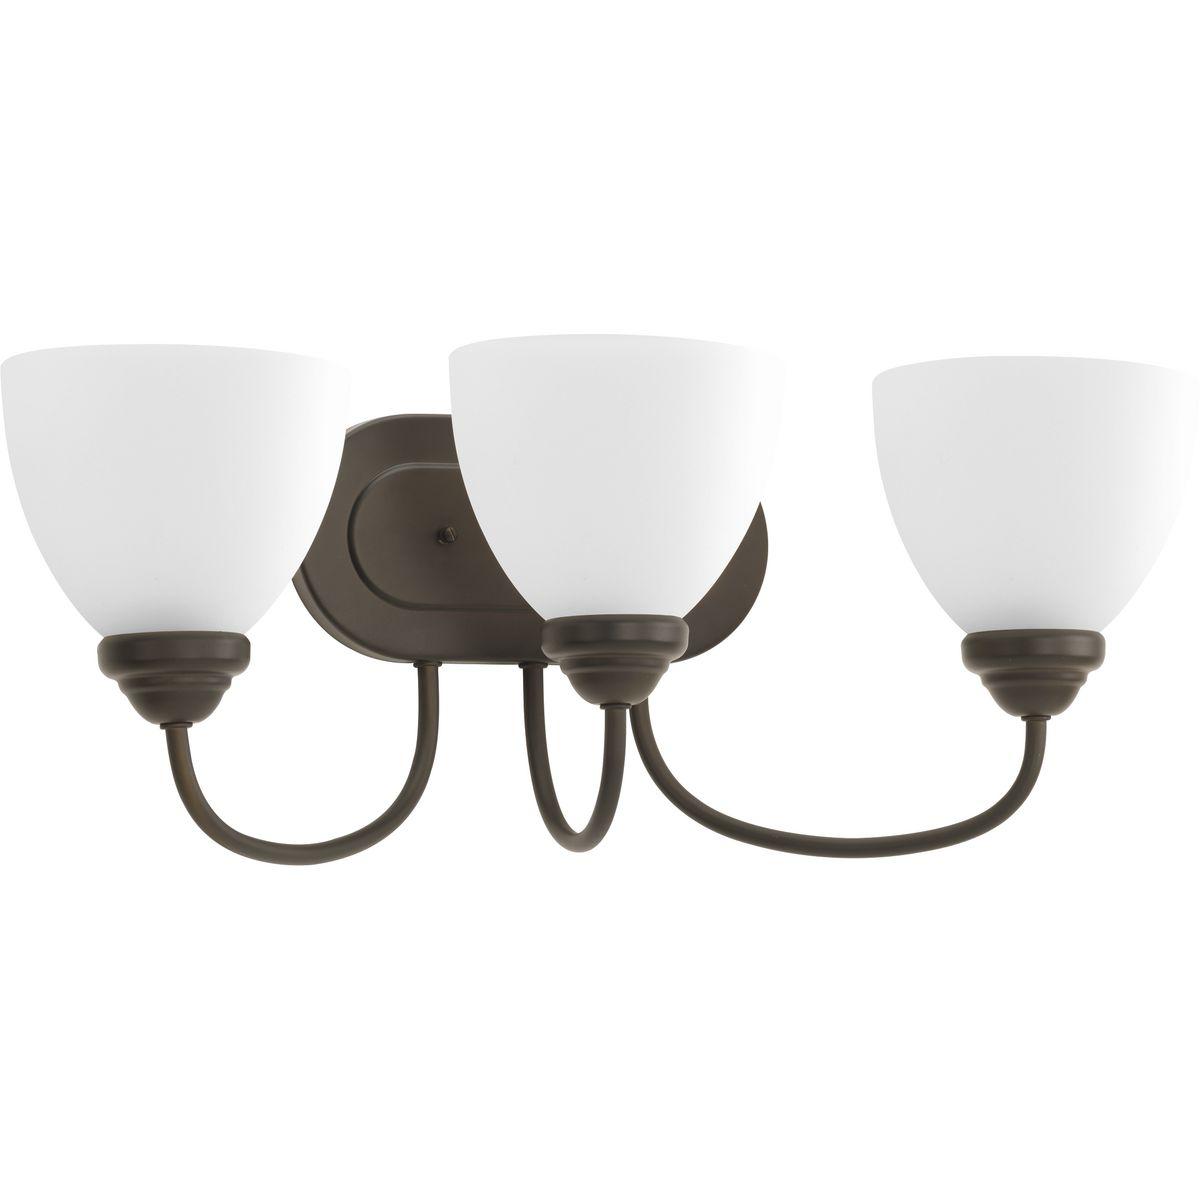 Hubbell P2919-20 The Heart Collection possesses a smart simplicity to complement today's home. This three-light bath bracket includes etched glass shades to add distinction and provide pleasing illumination to any room. Versatile design permits installation of fixture fac